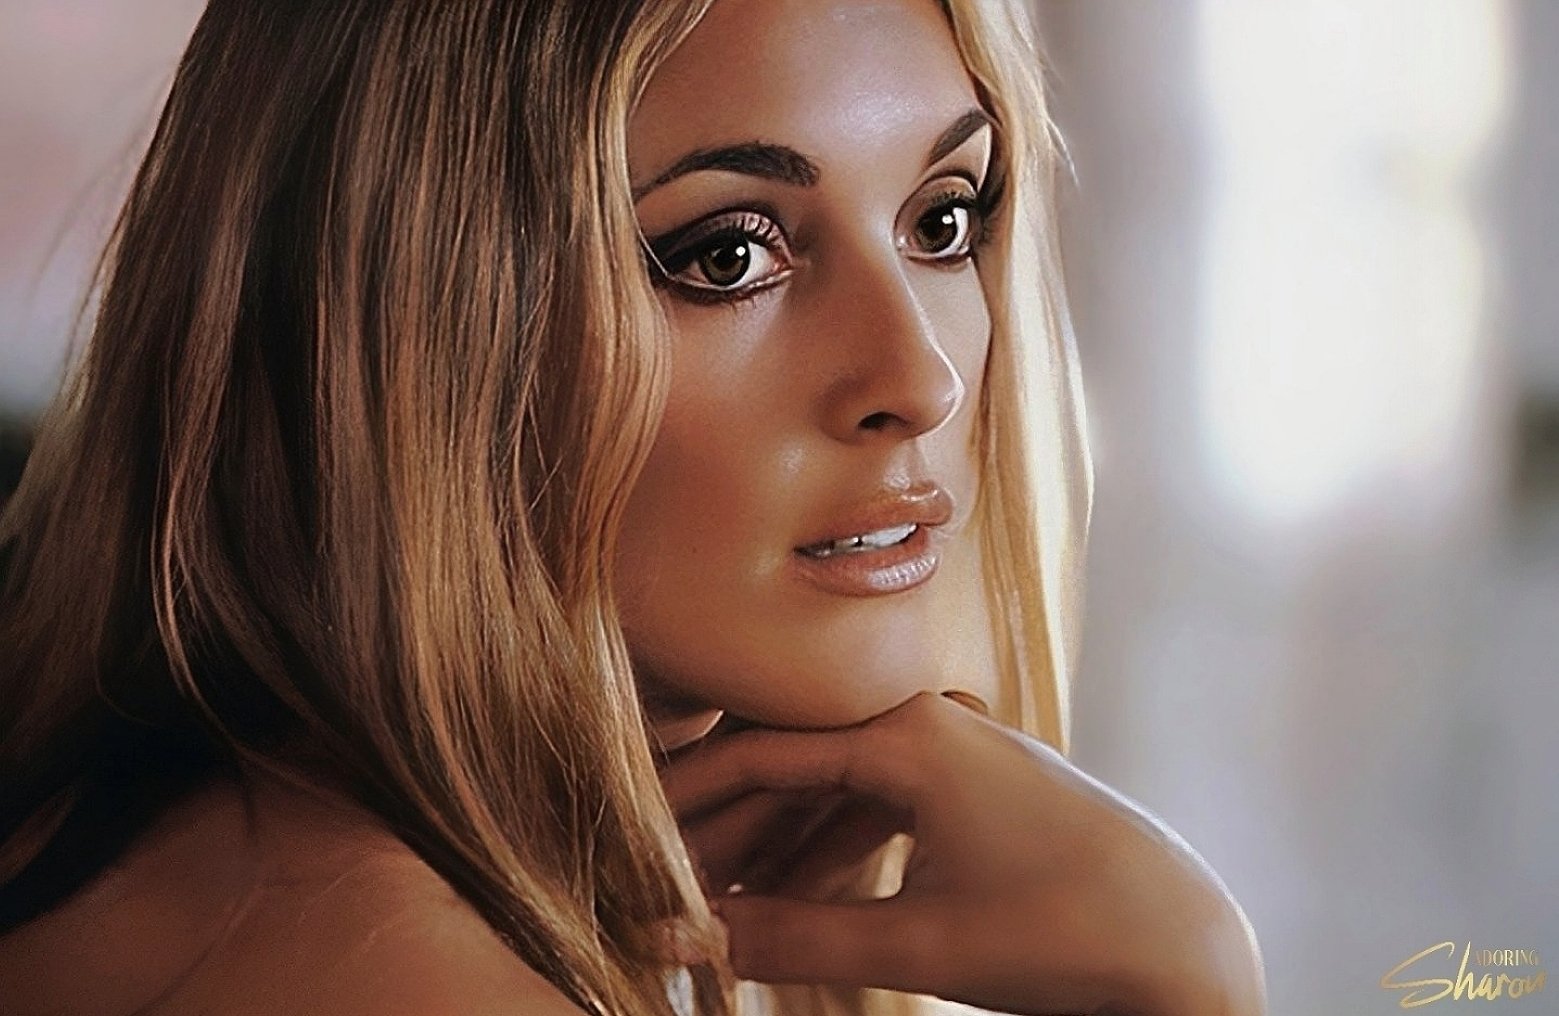 80 years ago today, an angel arrived on earth. Happy Heavenly Birthday, Sharon Tate.  